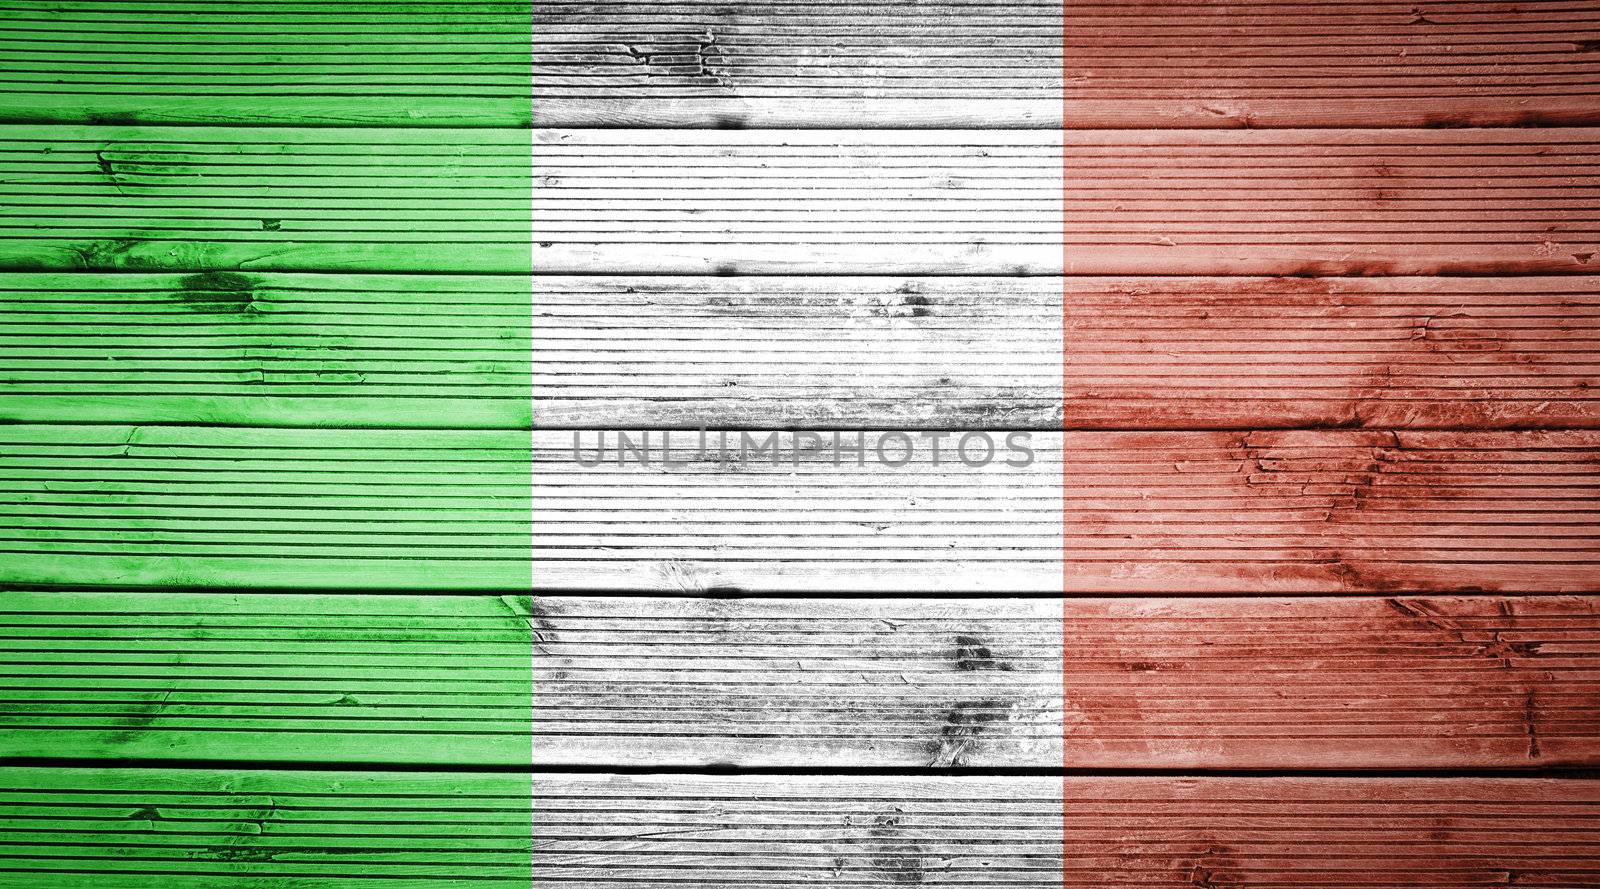 Wood texture background with colors of the flag of Italy by doble.d